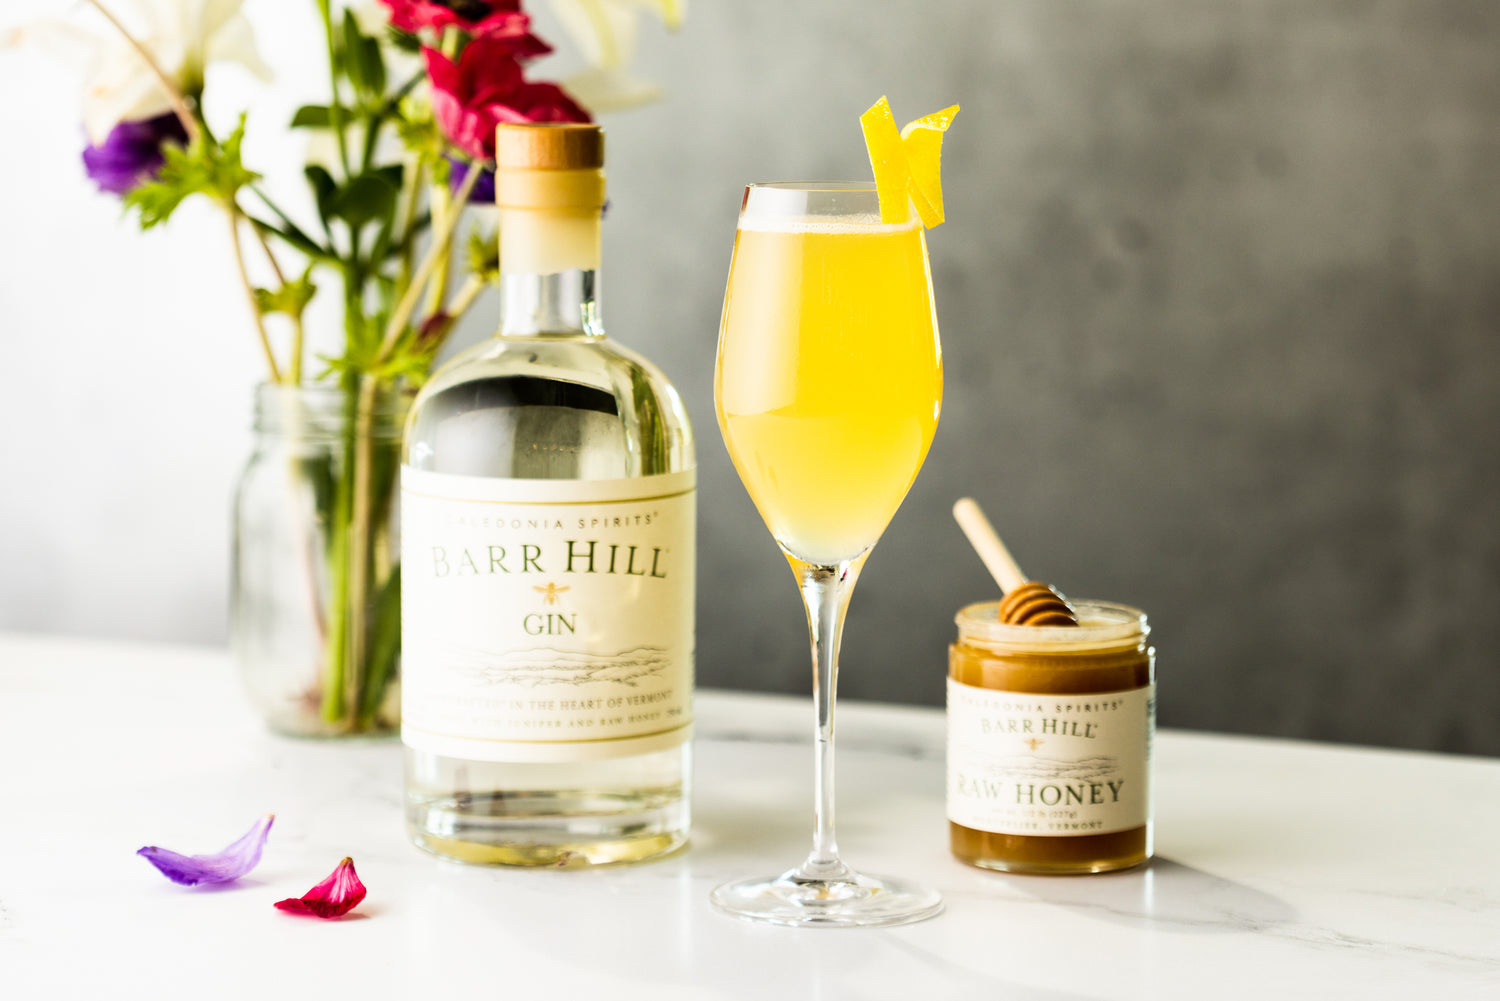 Barr Hill Hive 75 Cocktail